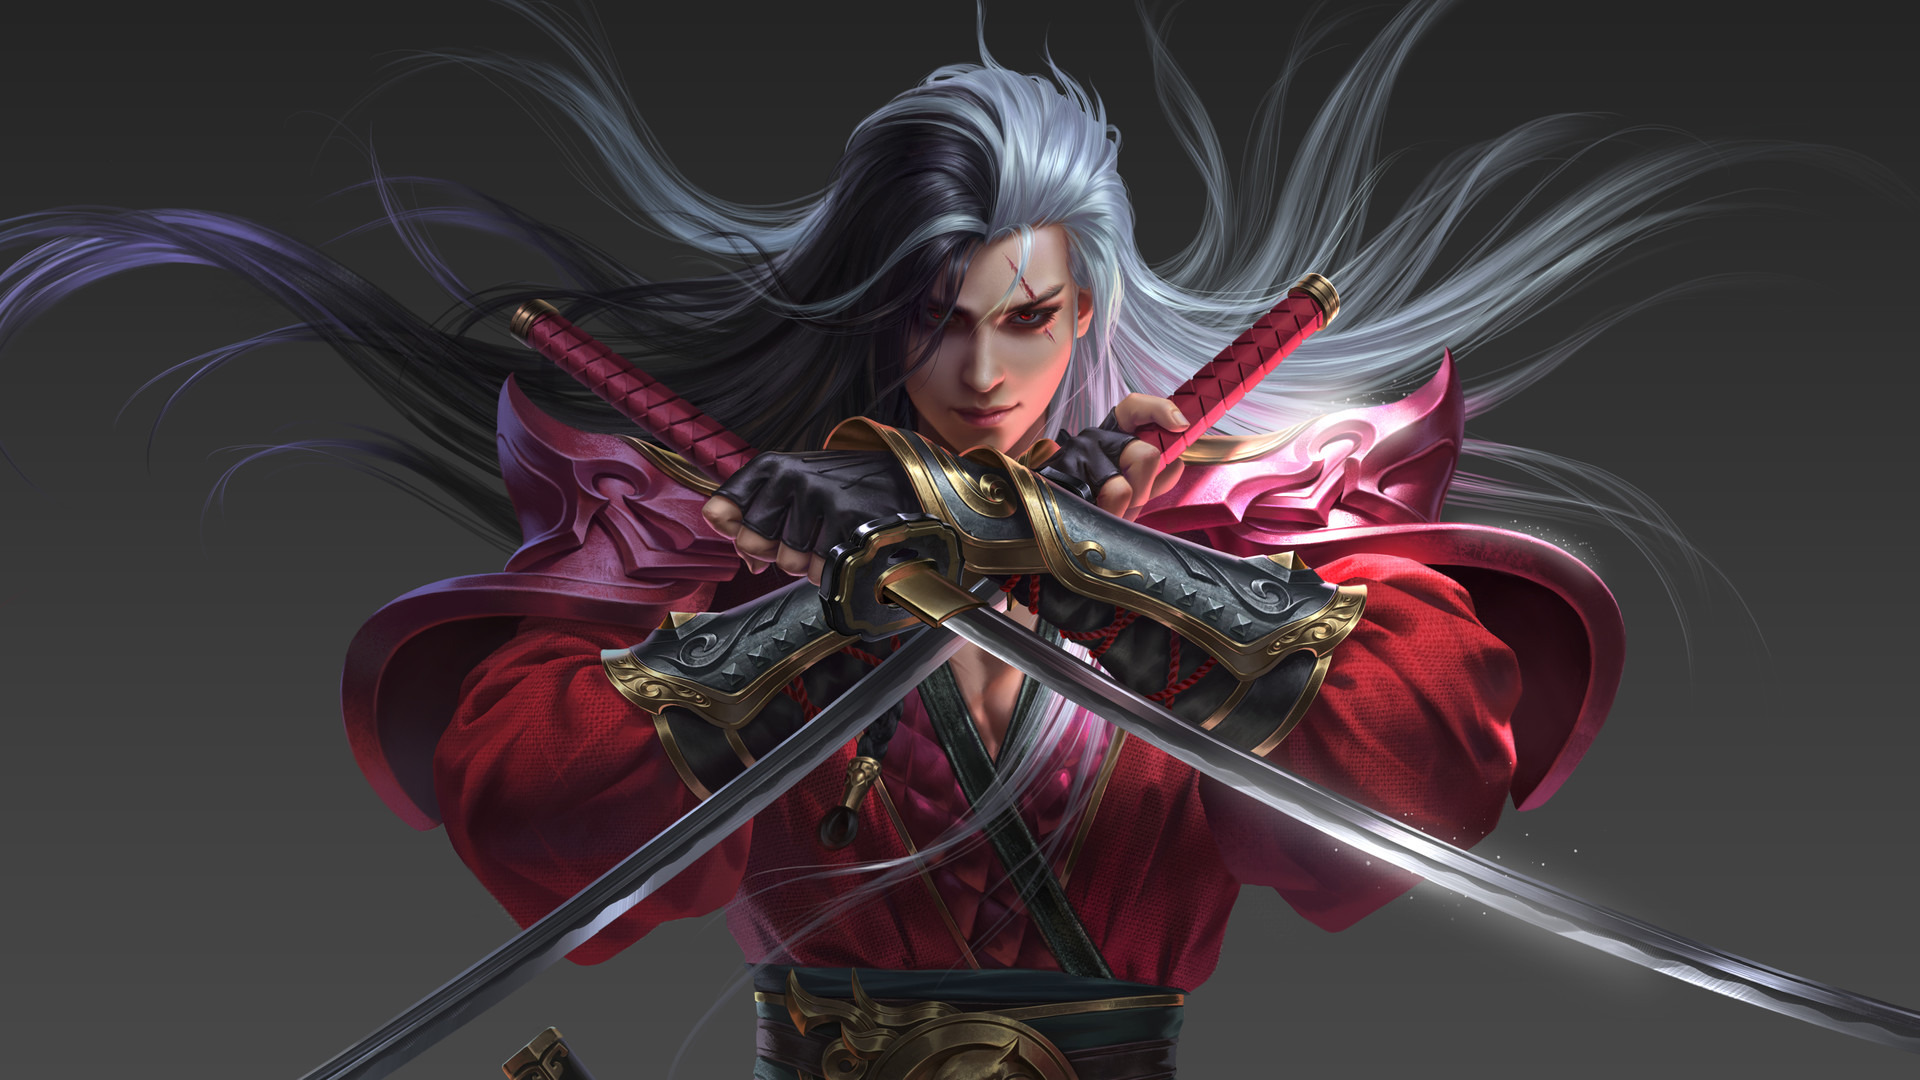 General 1920x1080 drawing Asian men silver hair long hair wind red eyes scars armor gloves weapon wakizashi blades warrior red clothing simple background Yang Chen sword frontal view